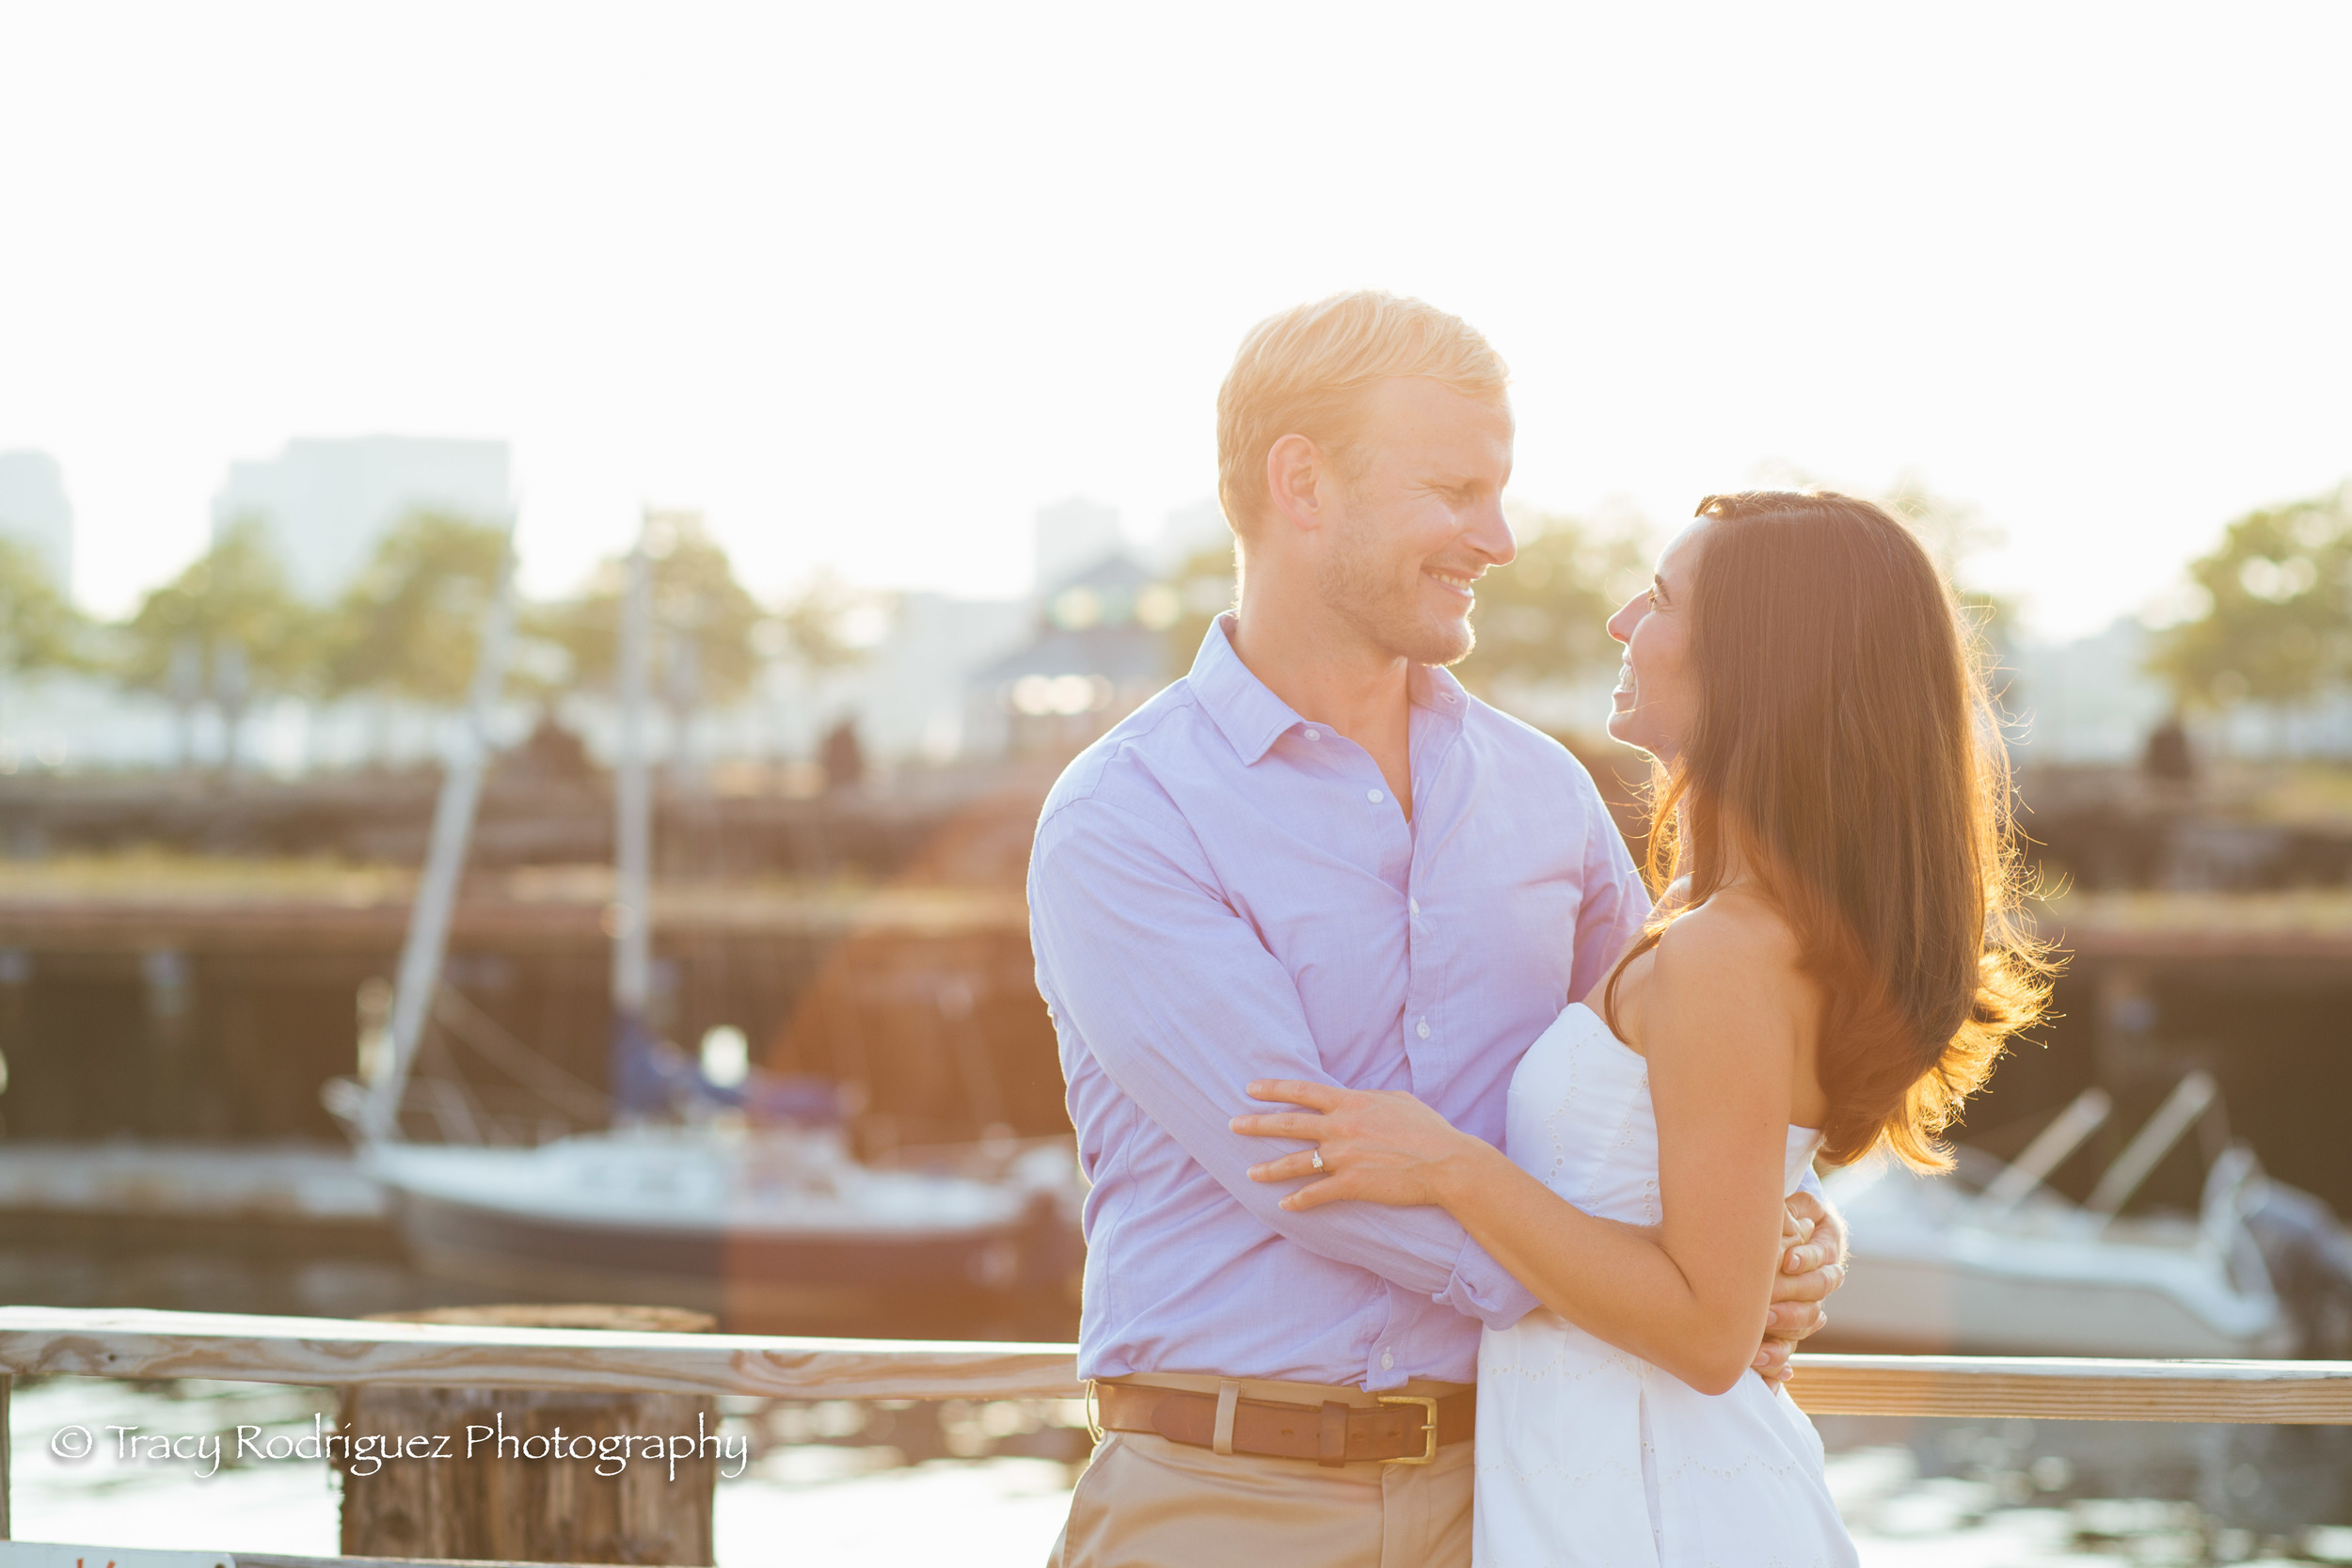 TracyRodriguezPhotography-Engagement-LowRes-9.jpg